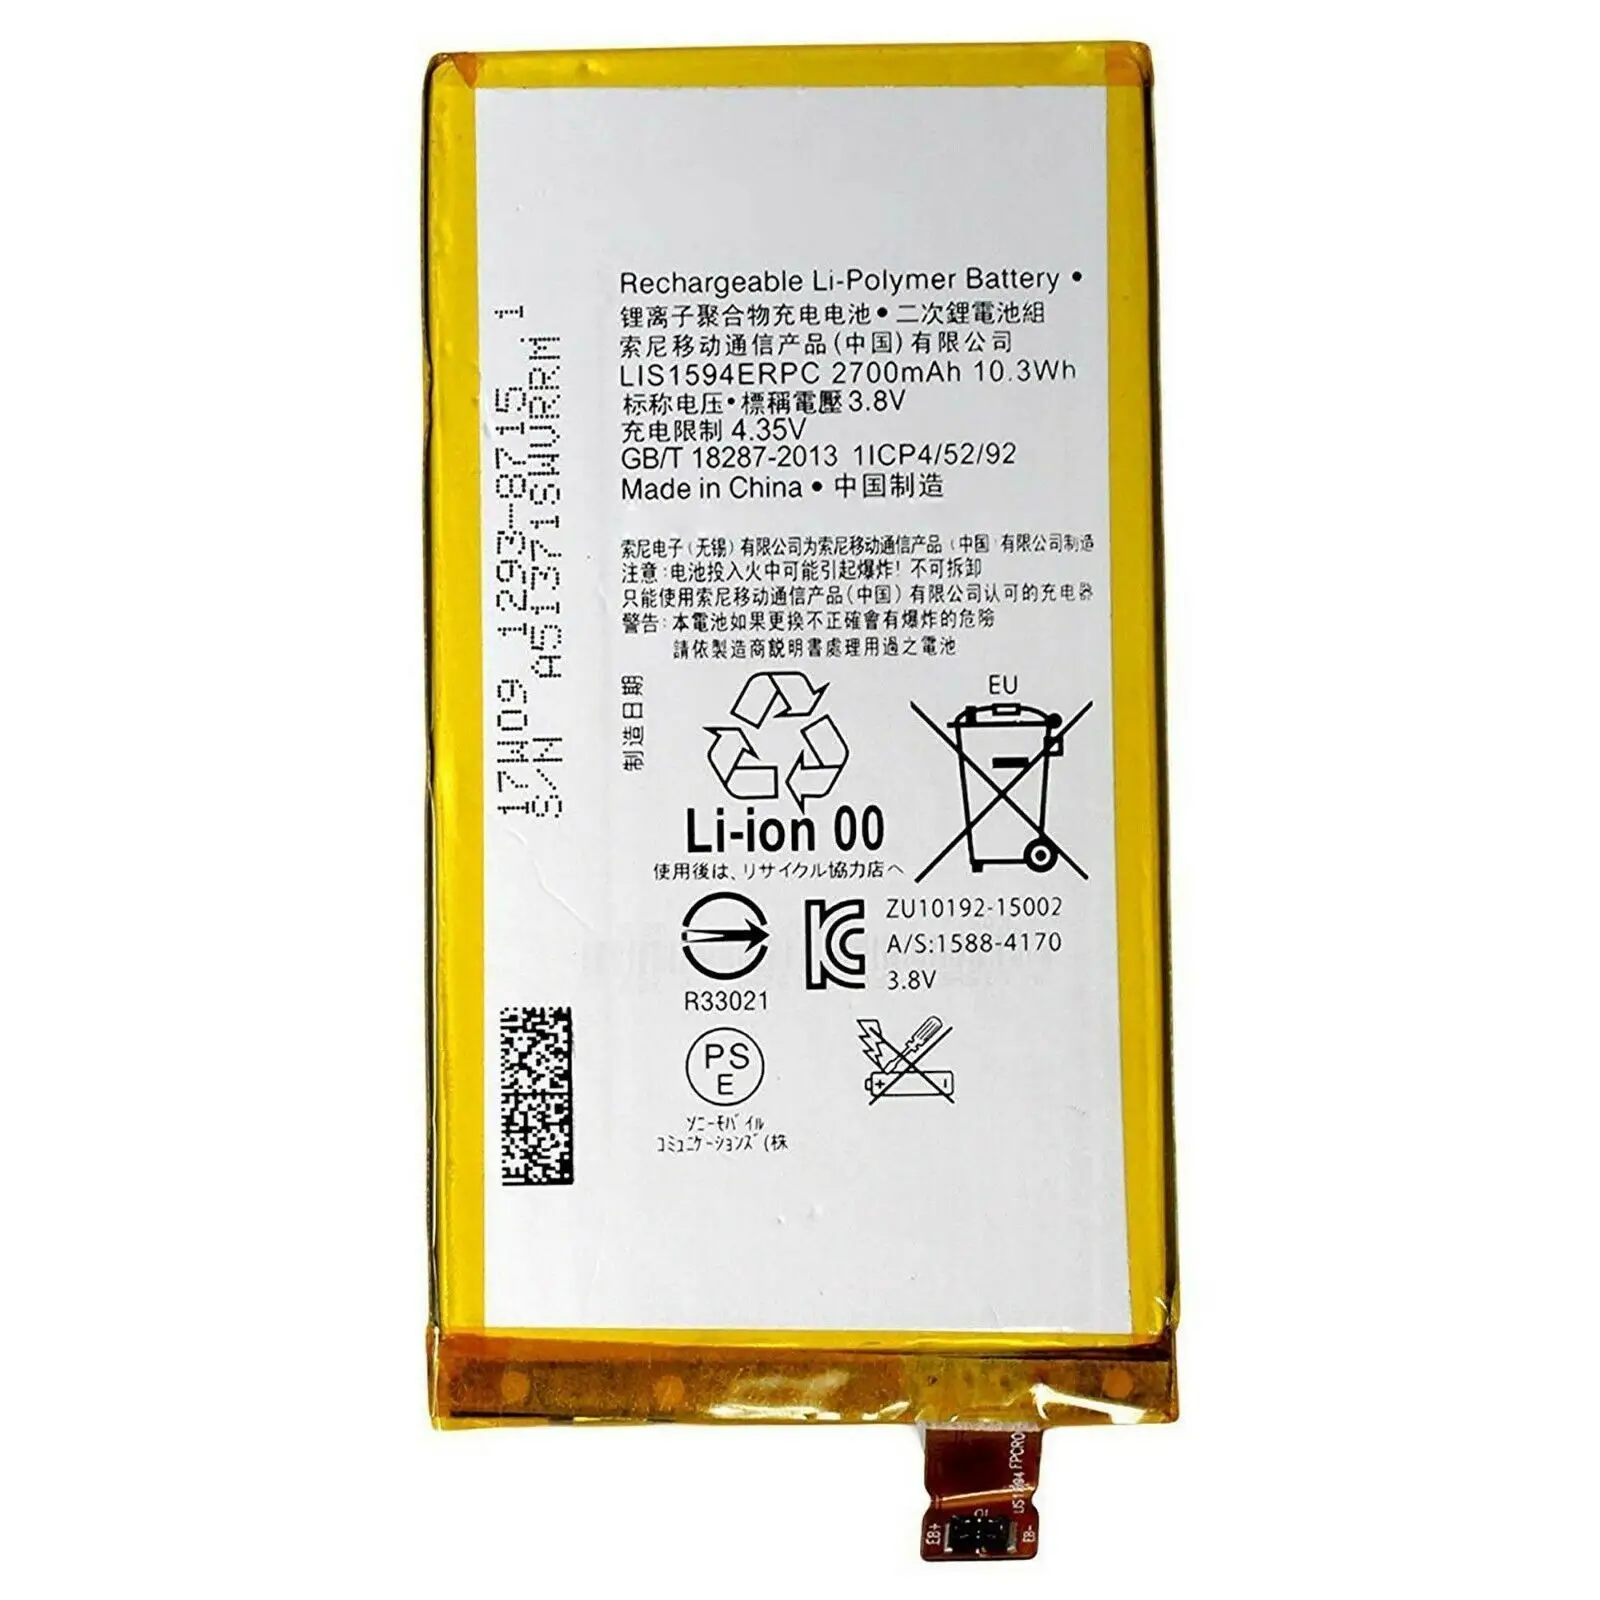 Lis1594erpc Battery For Sony Xperia Z5 Compact Battery 2700 Mah